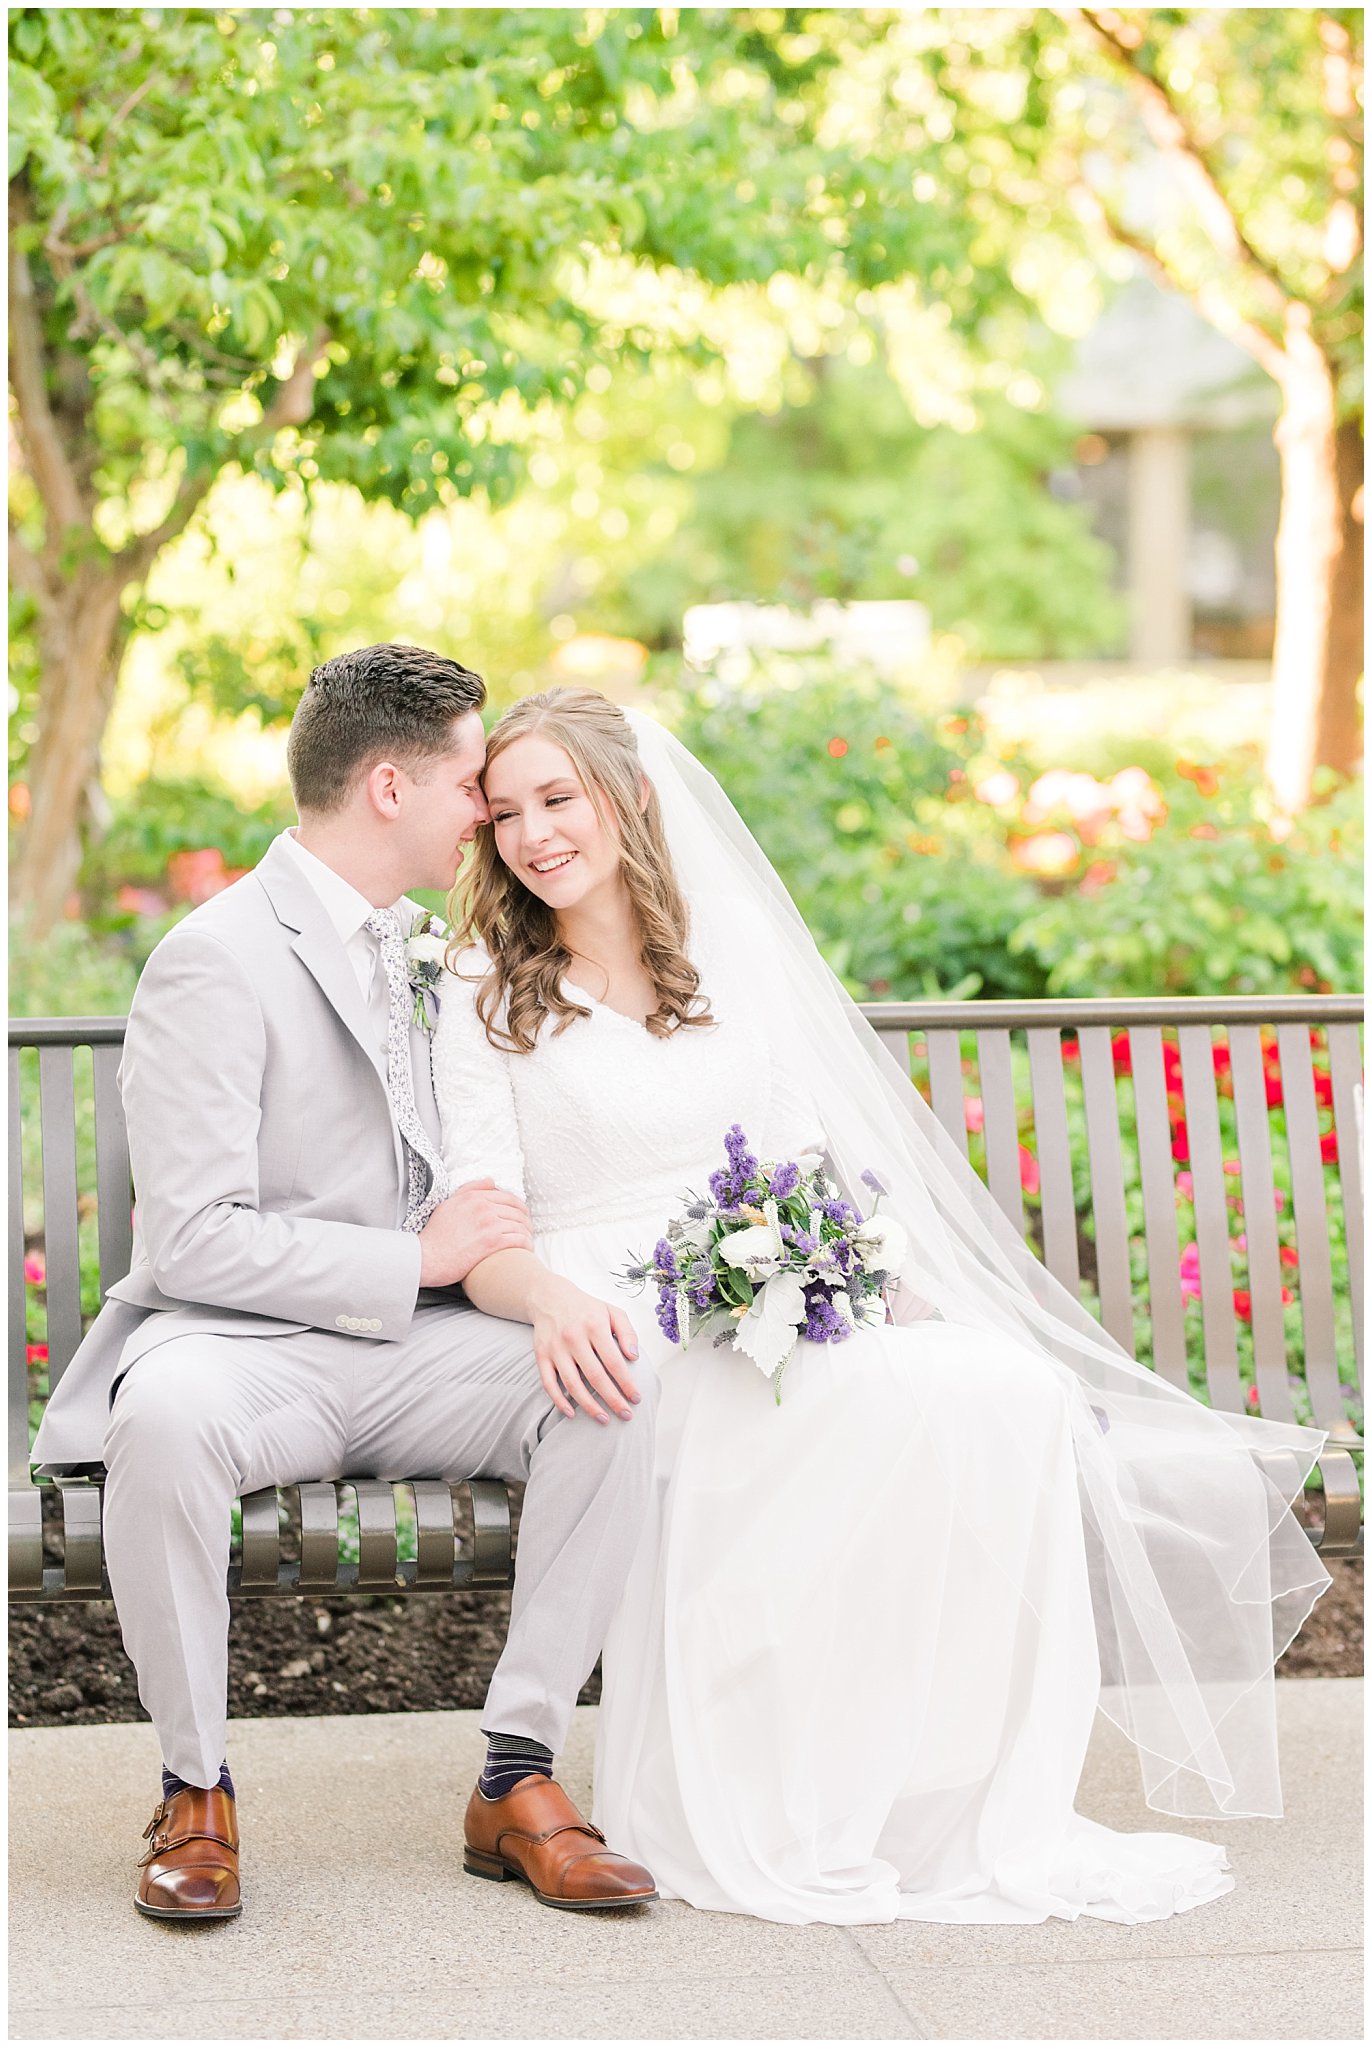 Bride and groom sitting in front of flowers and gardens at the Salt Lake Temple | Top Utah Wedding and Couples Photos 2019 | Jessie and Dallin Photography